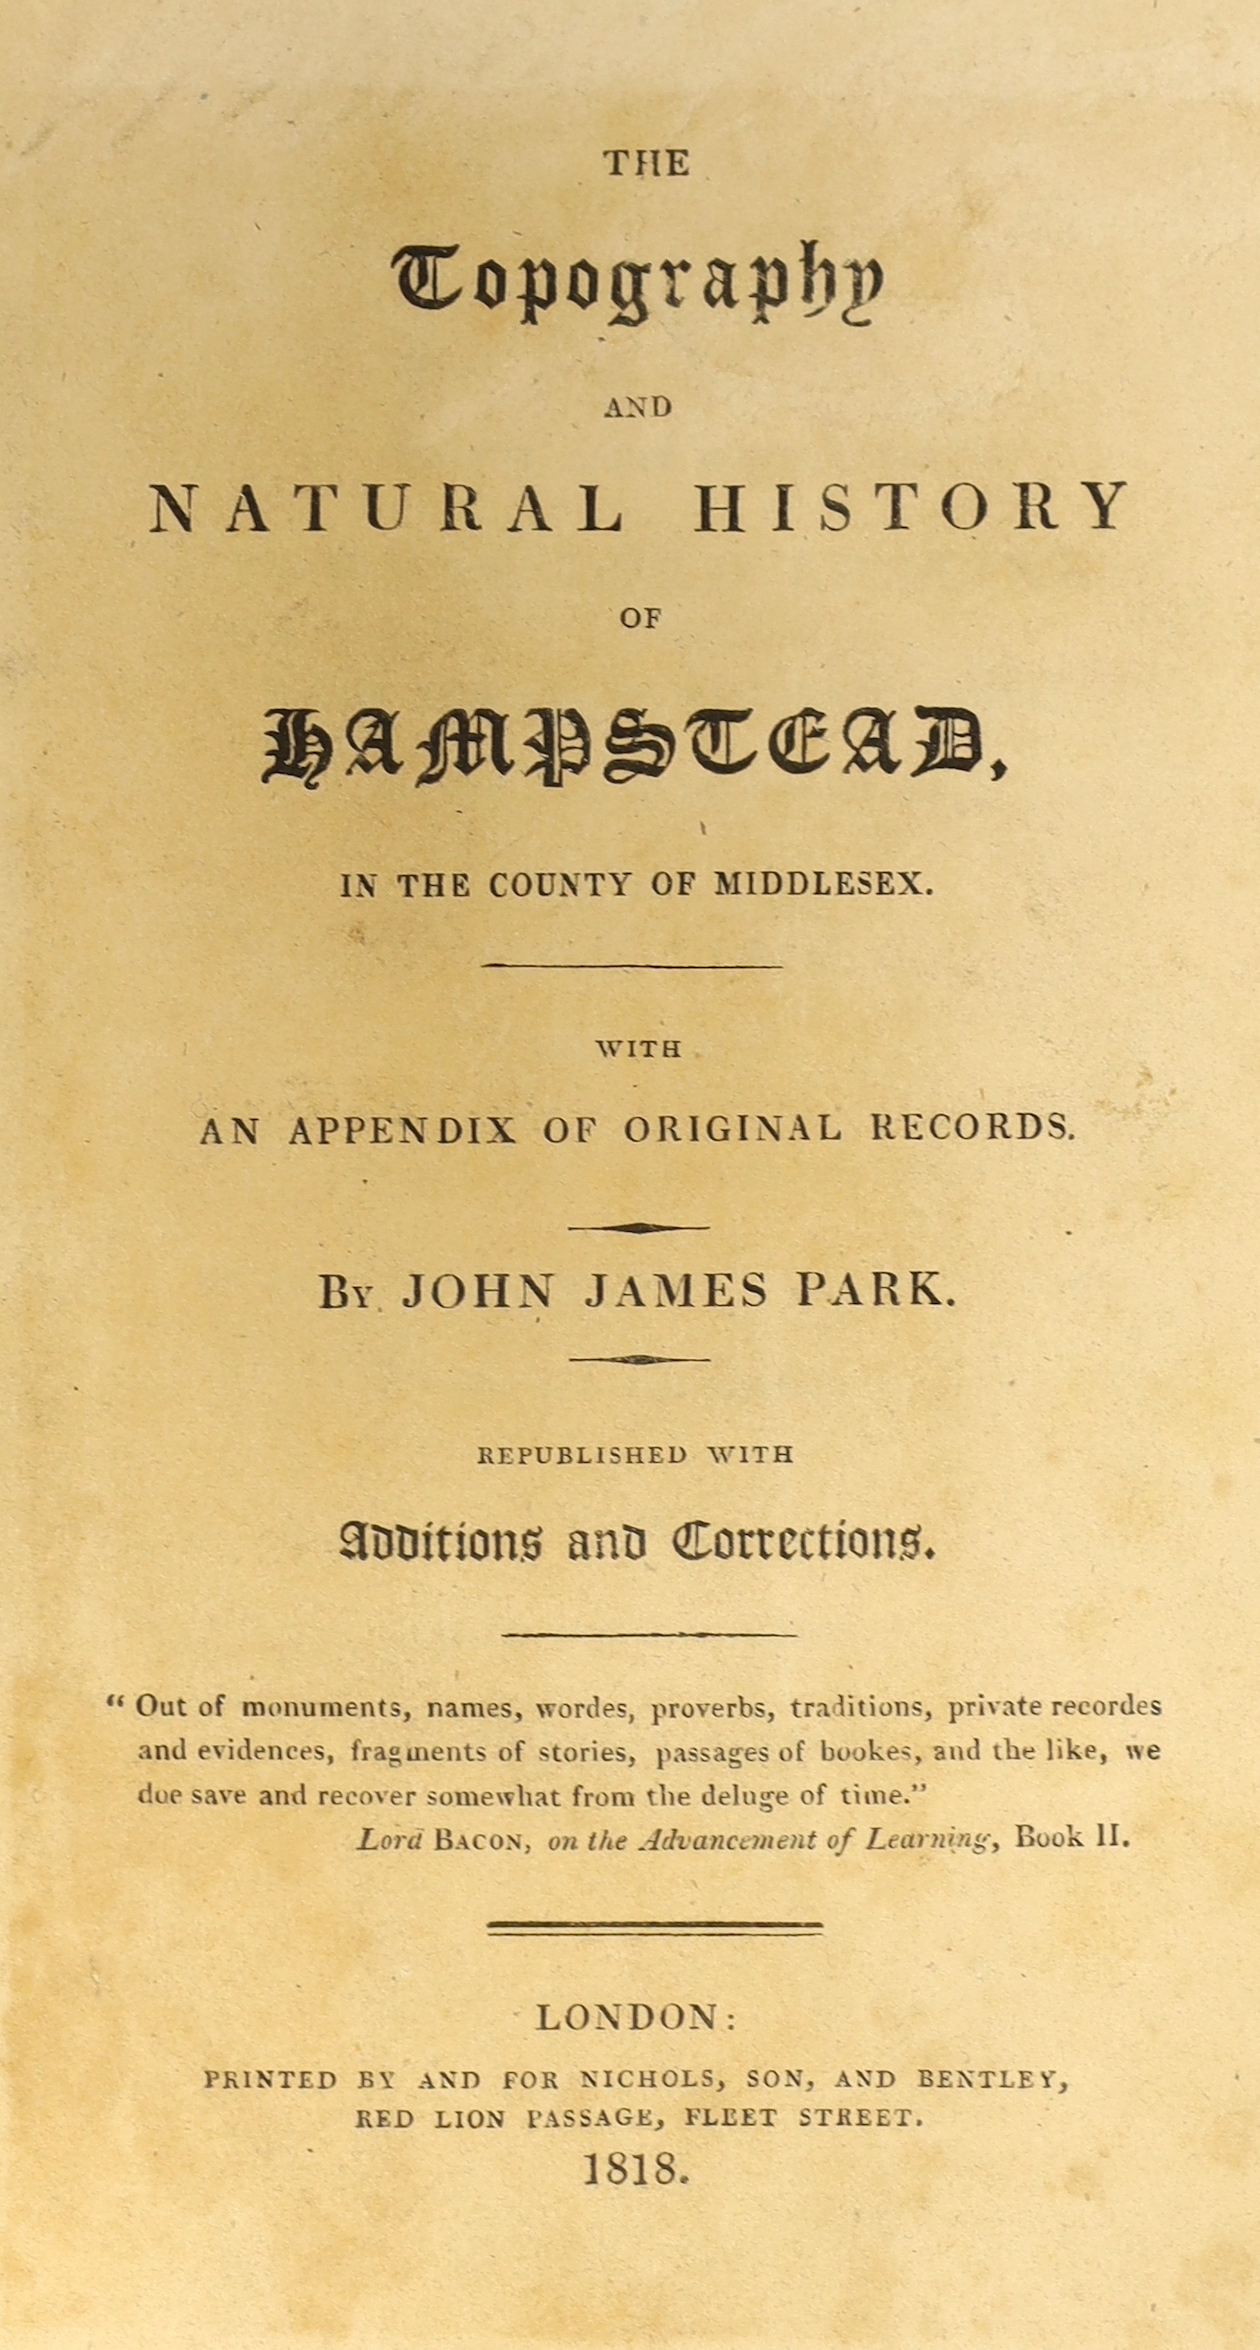 Park, John James - The Topography and Natural History of Hampstead....(2nd edition), republished with additions and corrections. large scale folded plan, 13 plates and 2 folded pedigrees, subscribers' list; later 19th ce